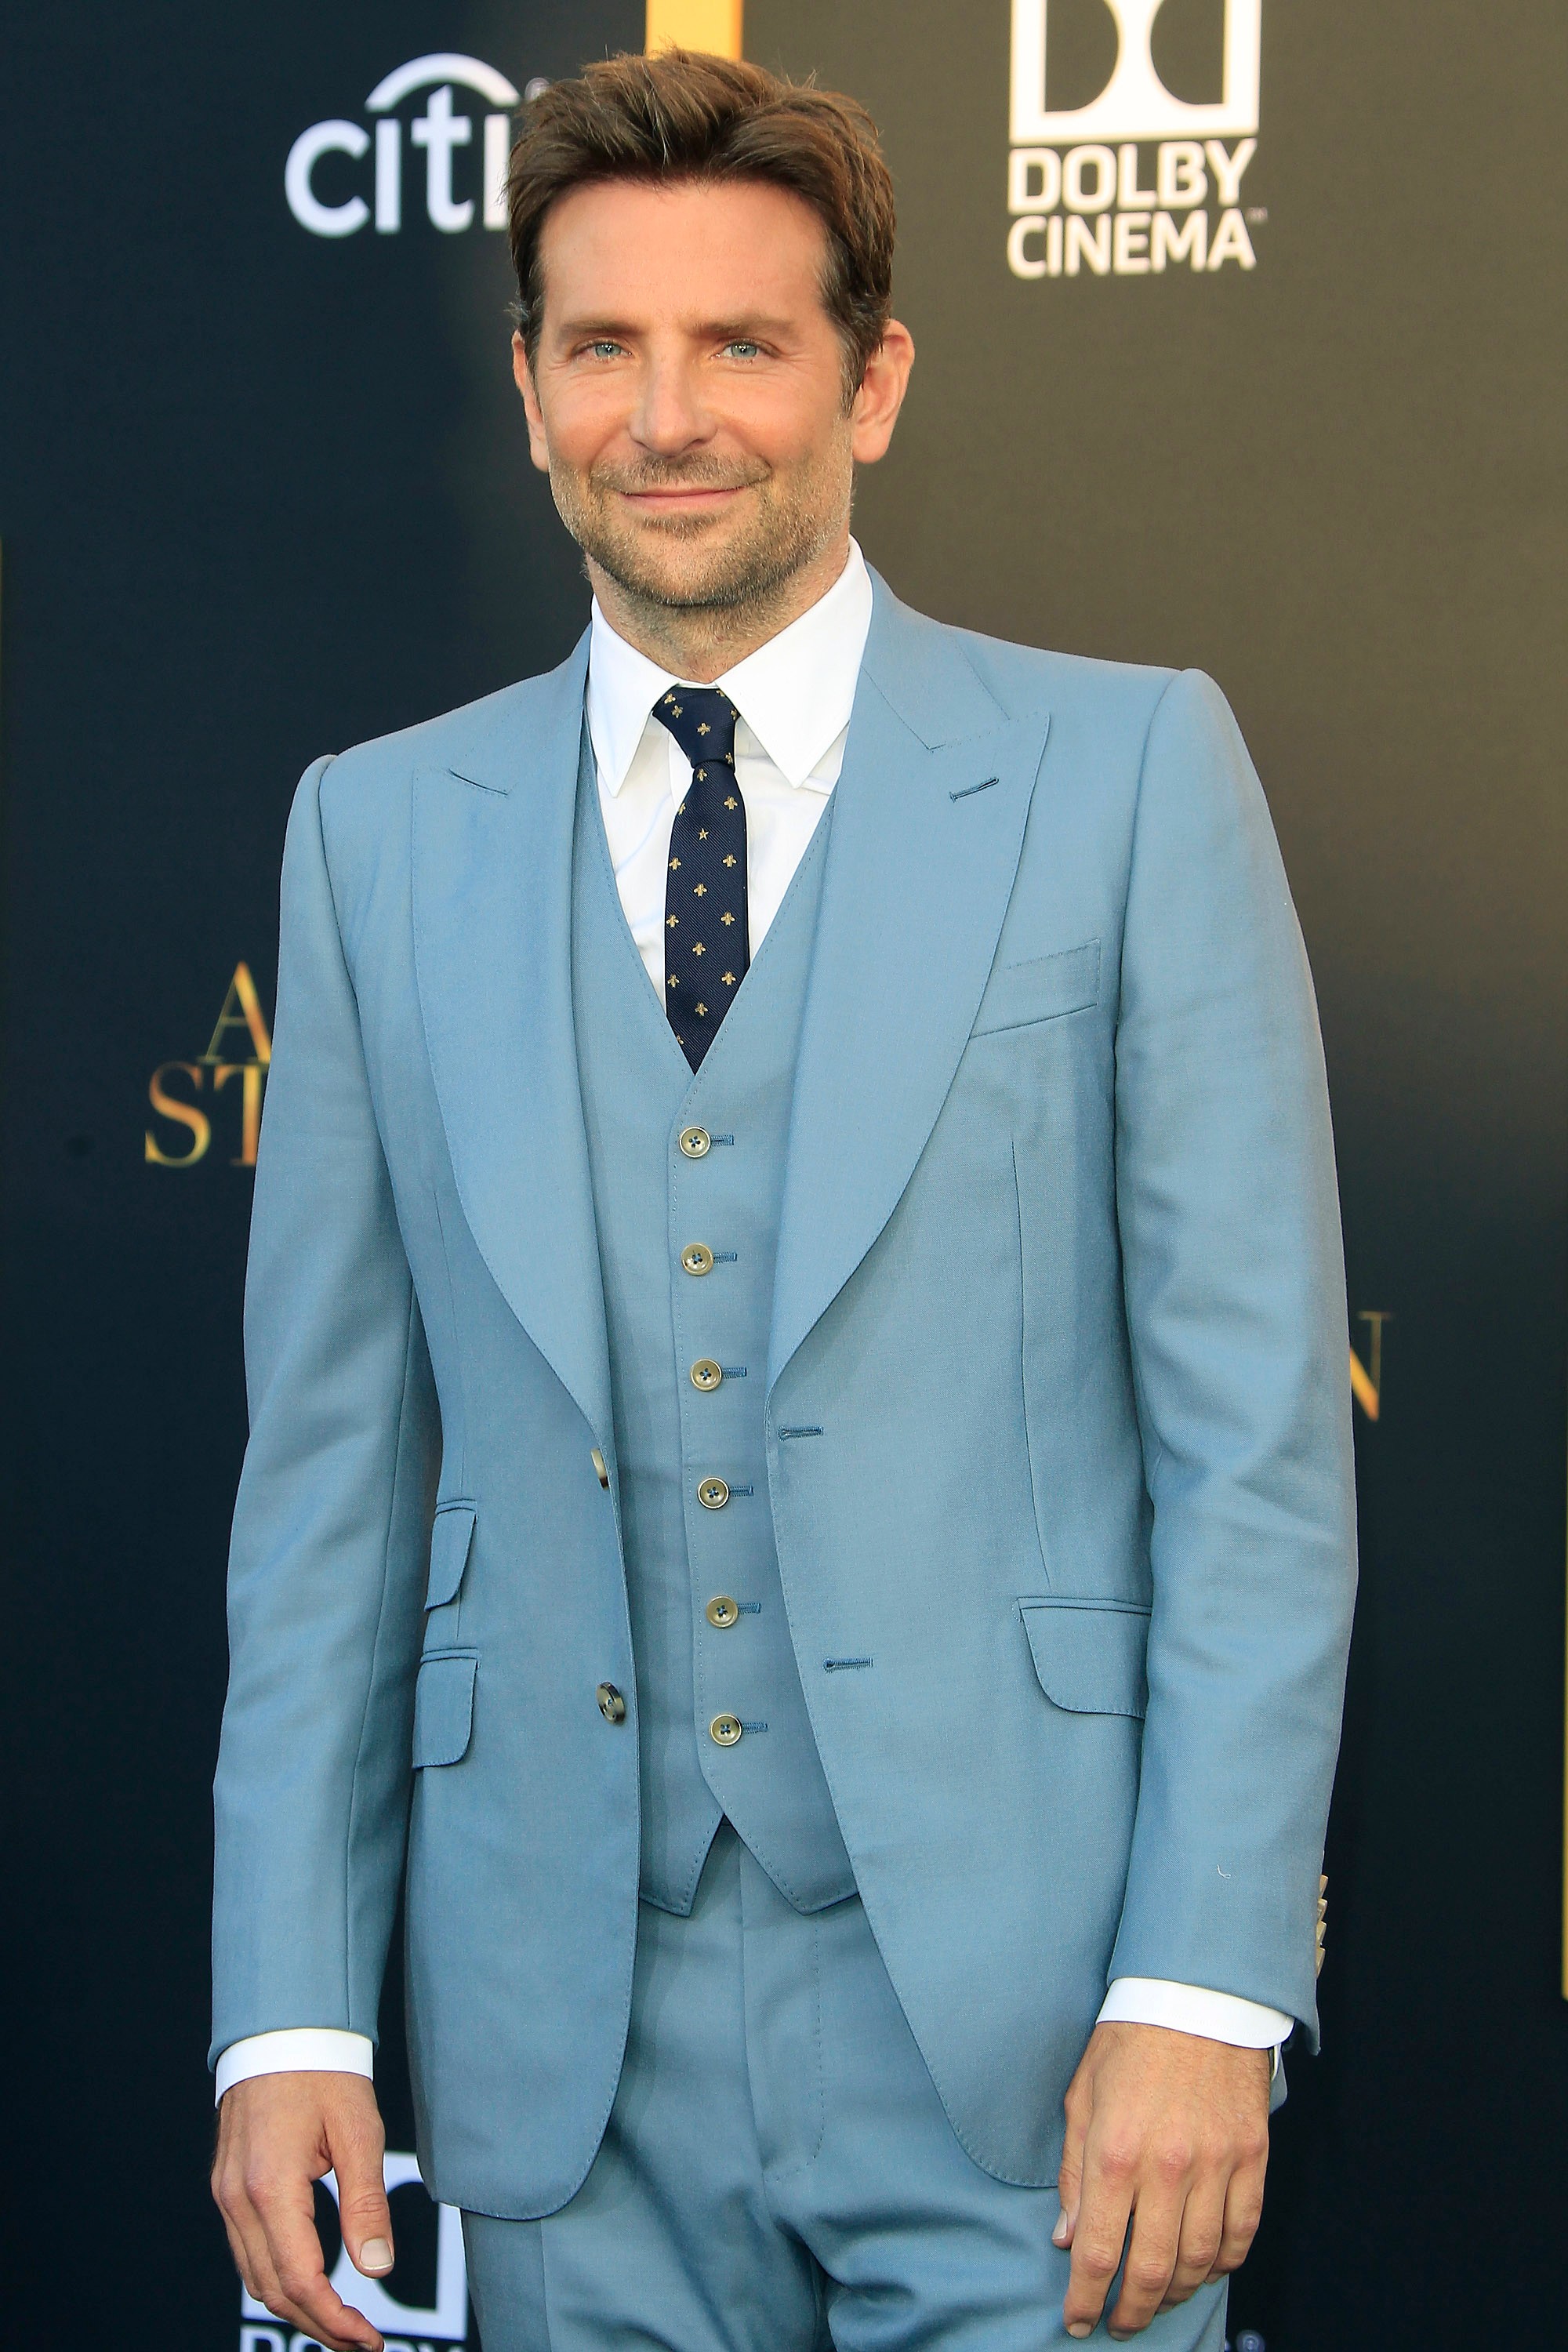 Bradley Cooper refuses to see himself as a sex symbol, and he wants to be judged on the merits of his work. Photo: Shutterstock